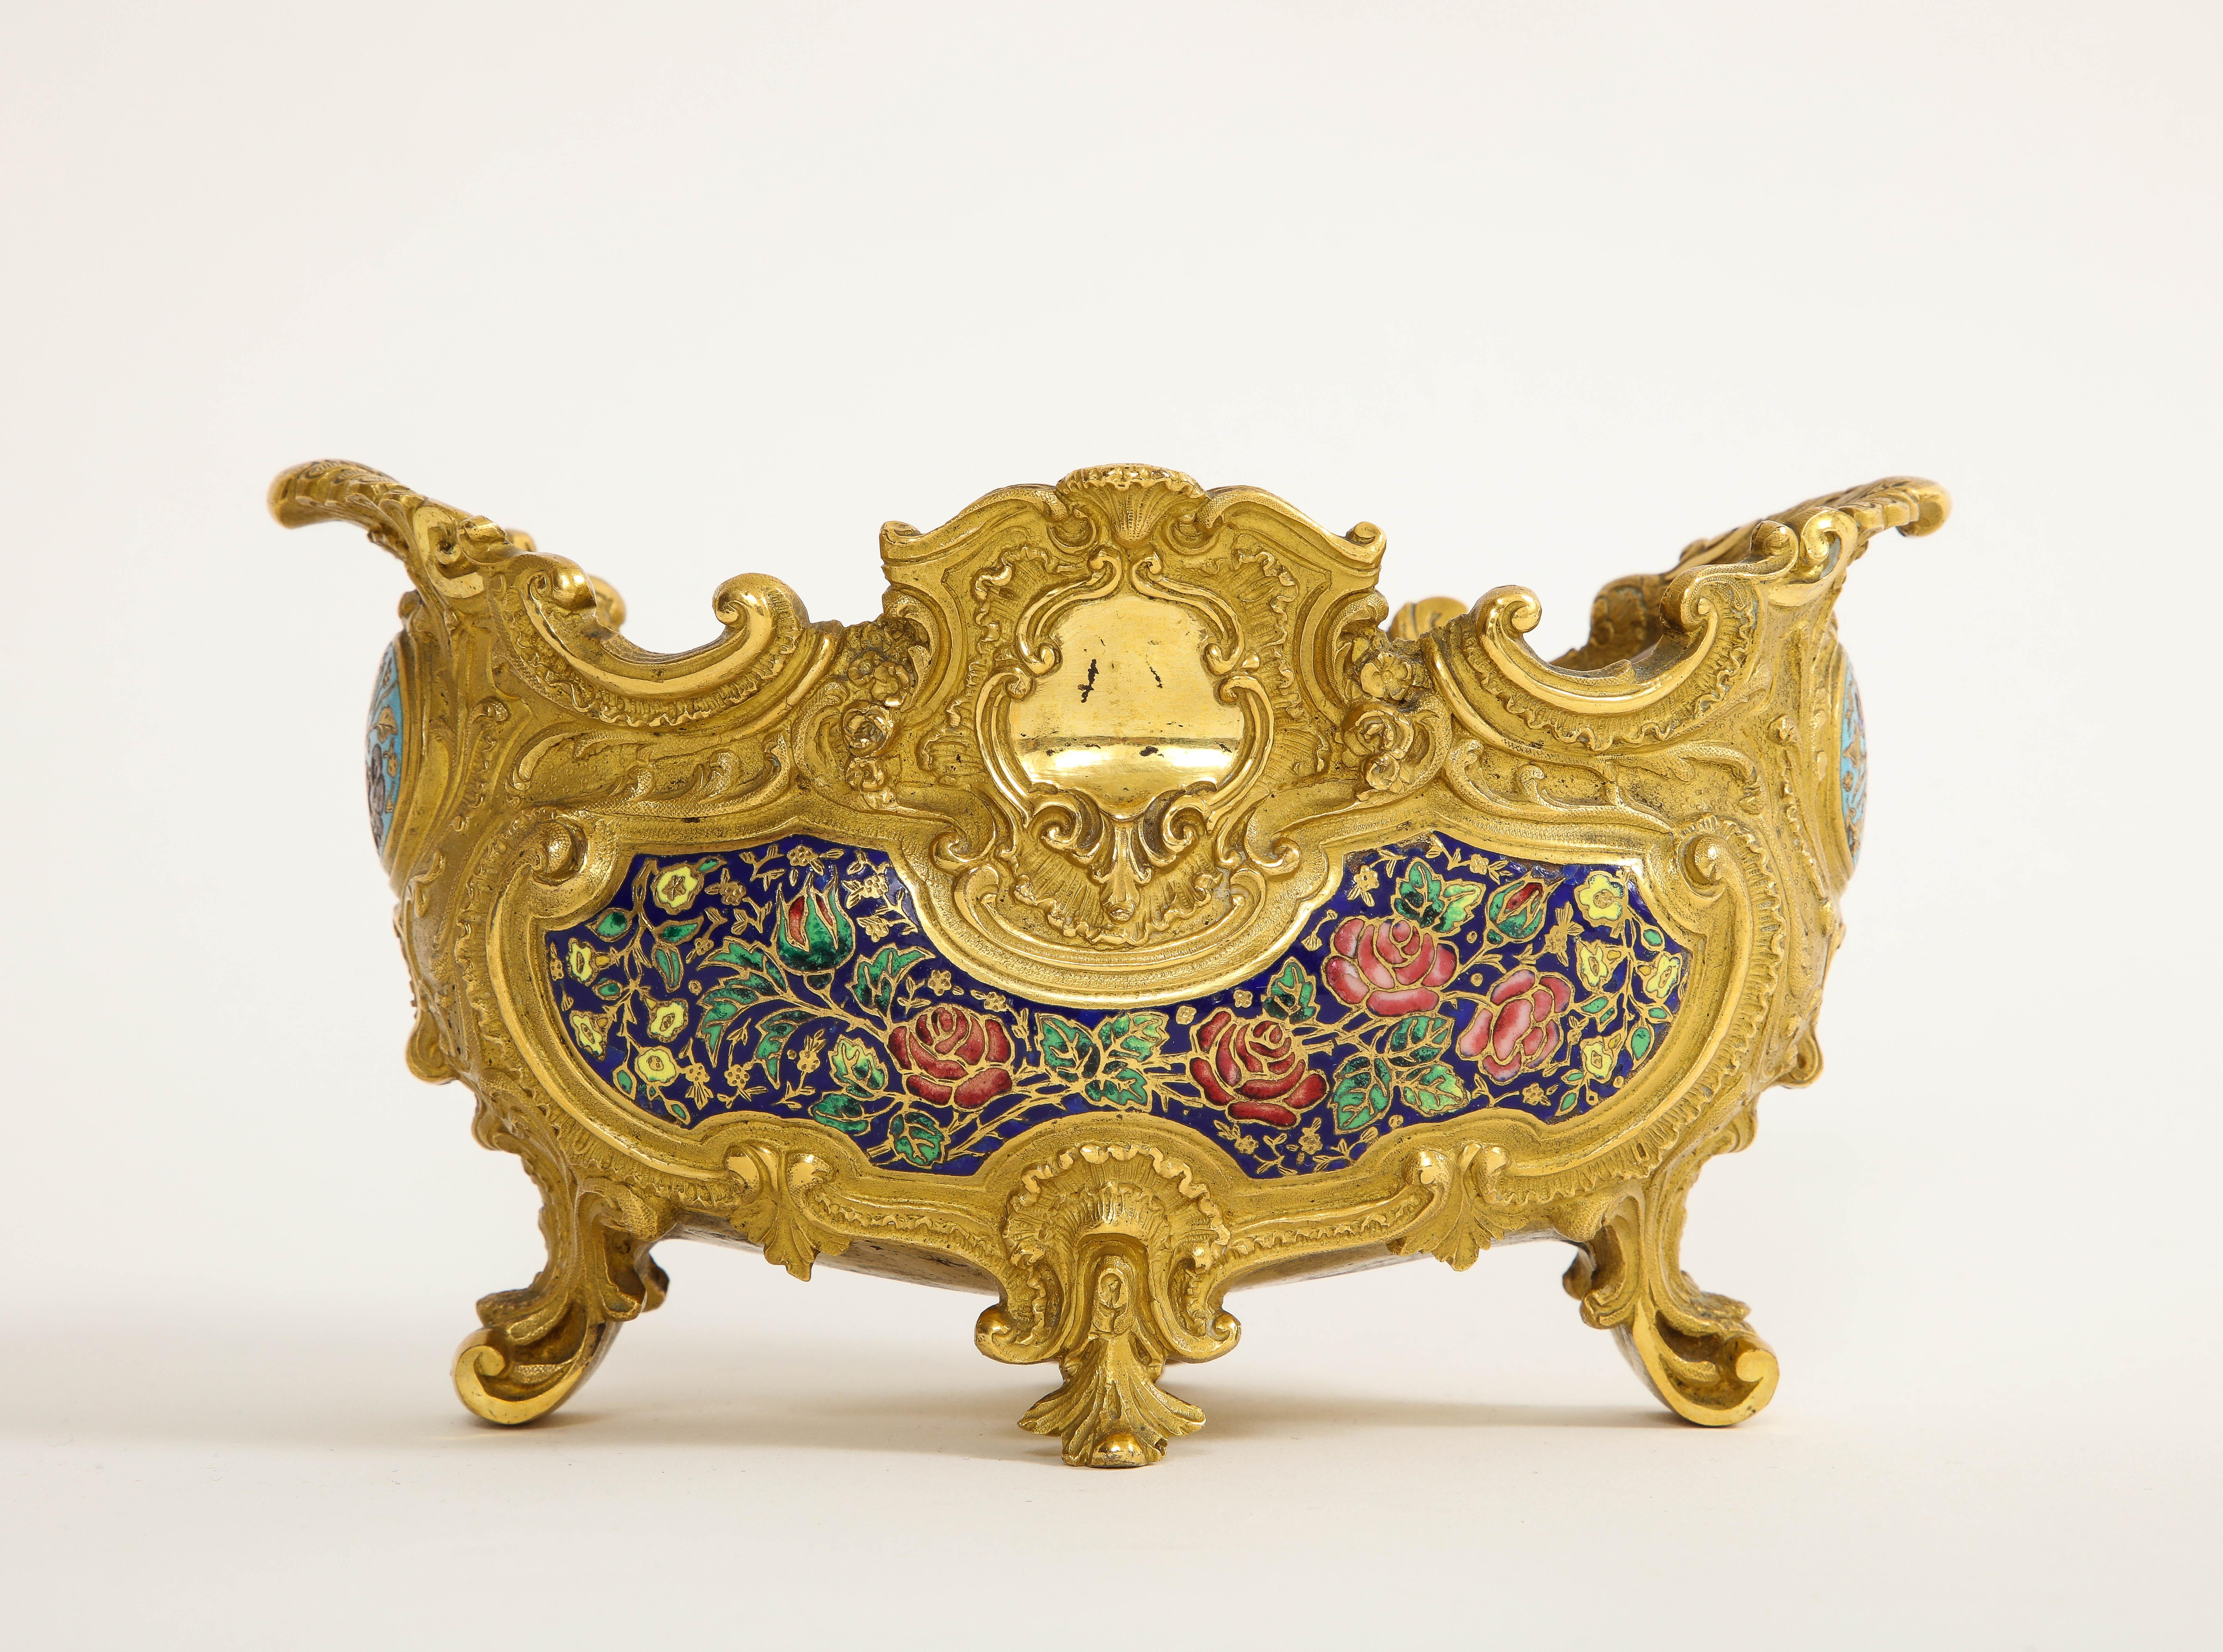 A 19th C. French Ormolu Champlevé Enamel Footed Centerpiece, Att. Barbedienne For Sale 1